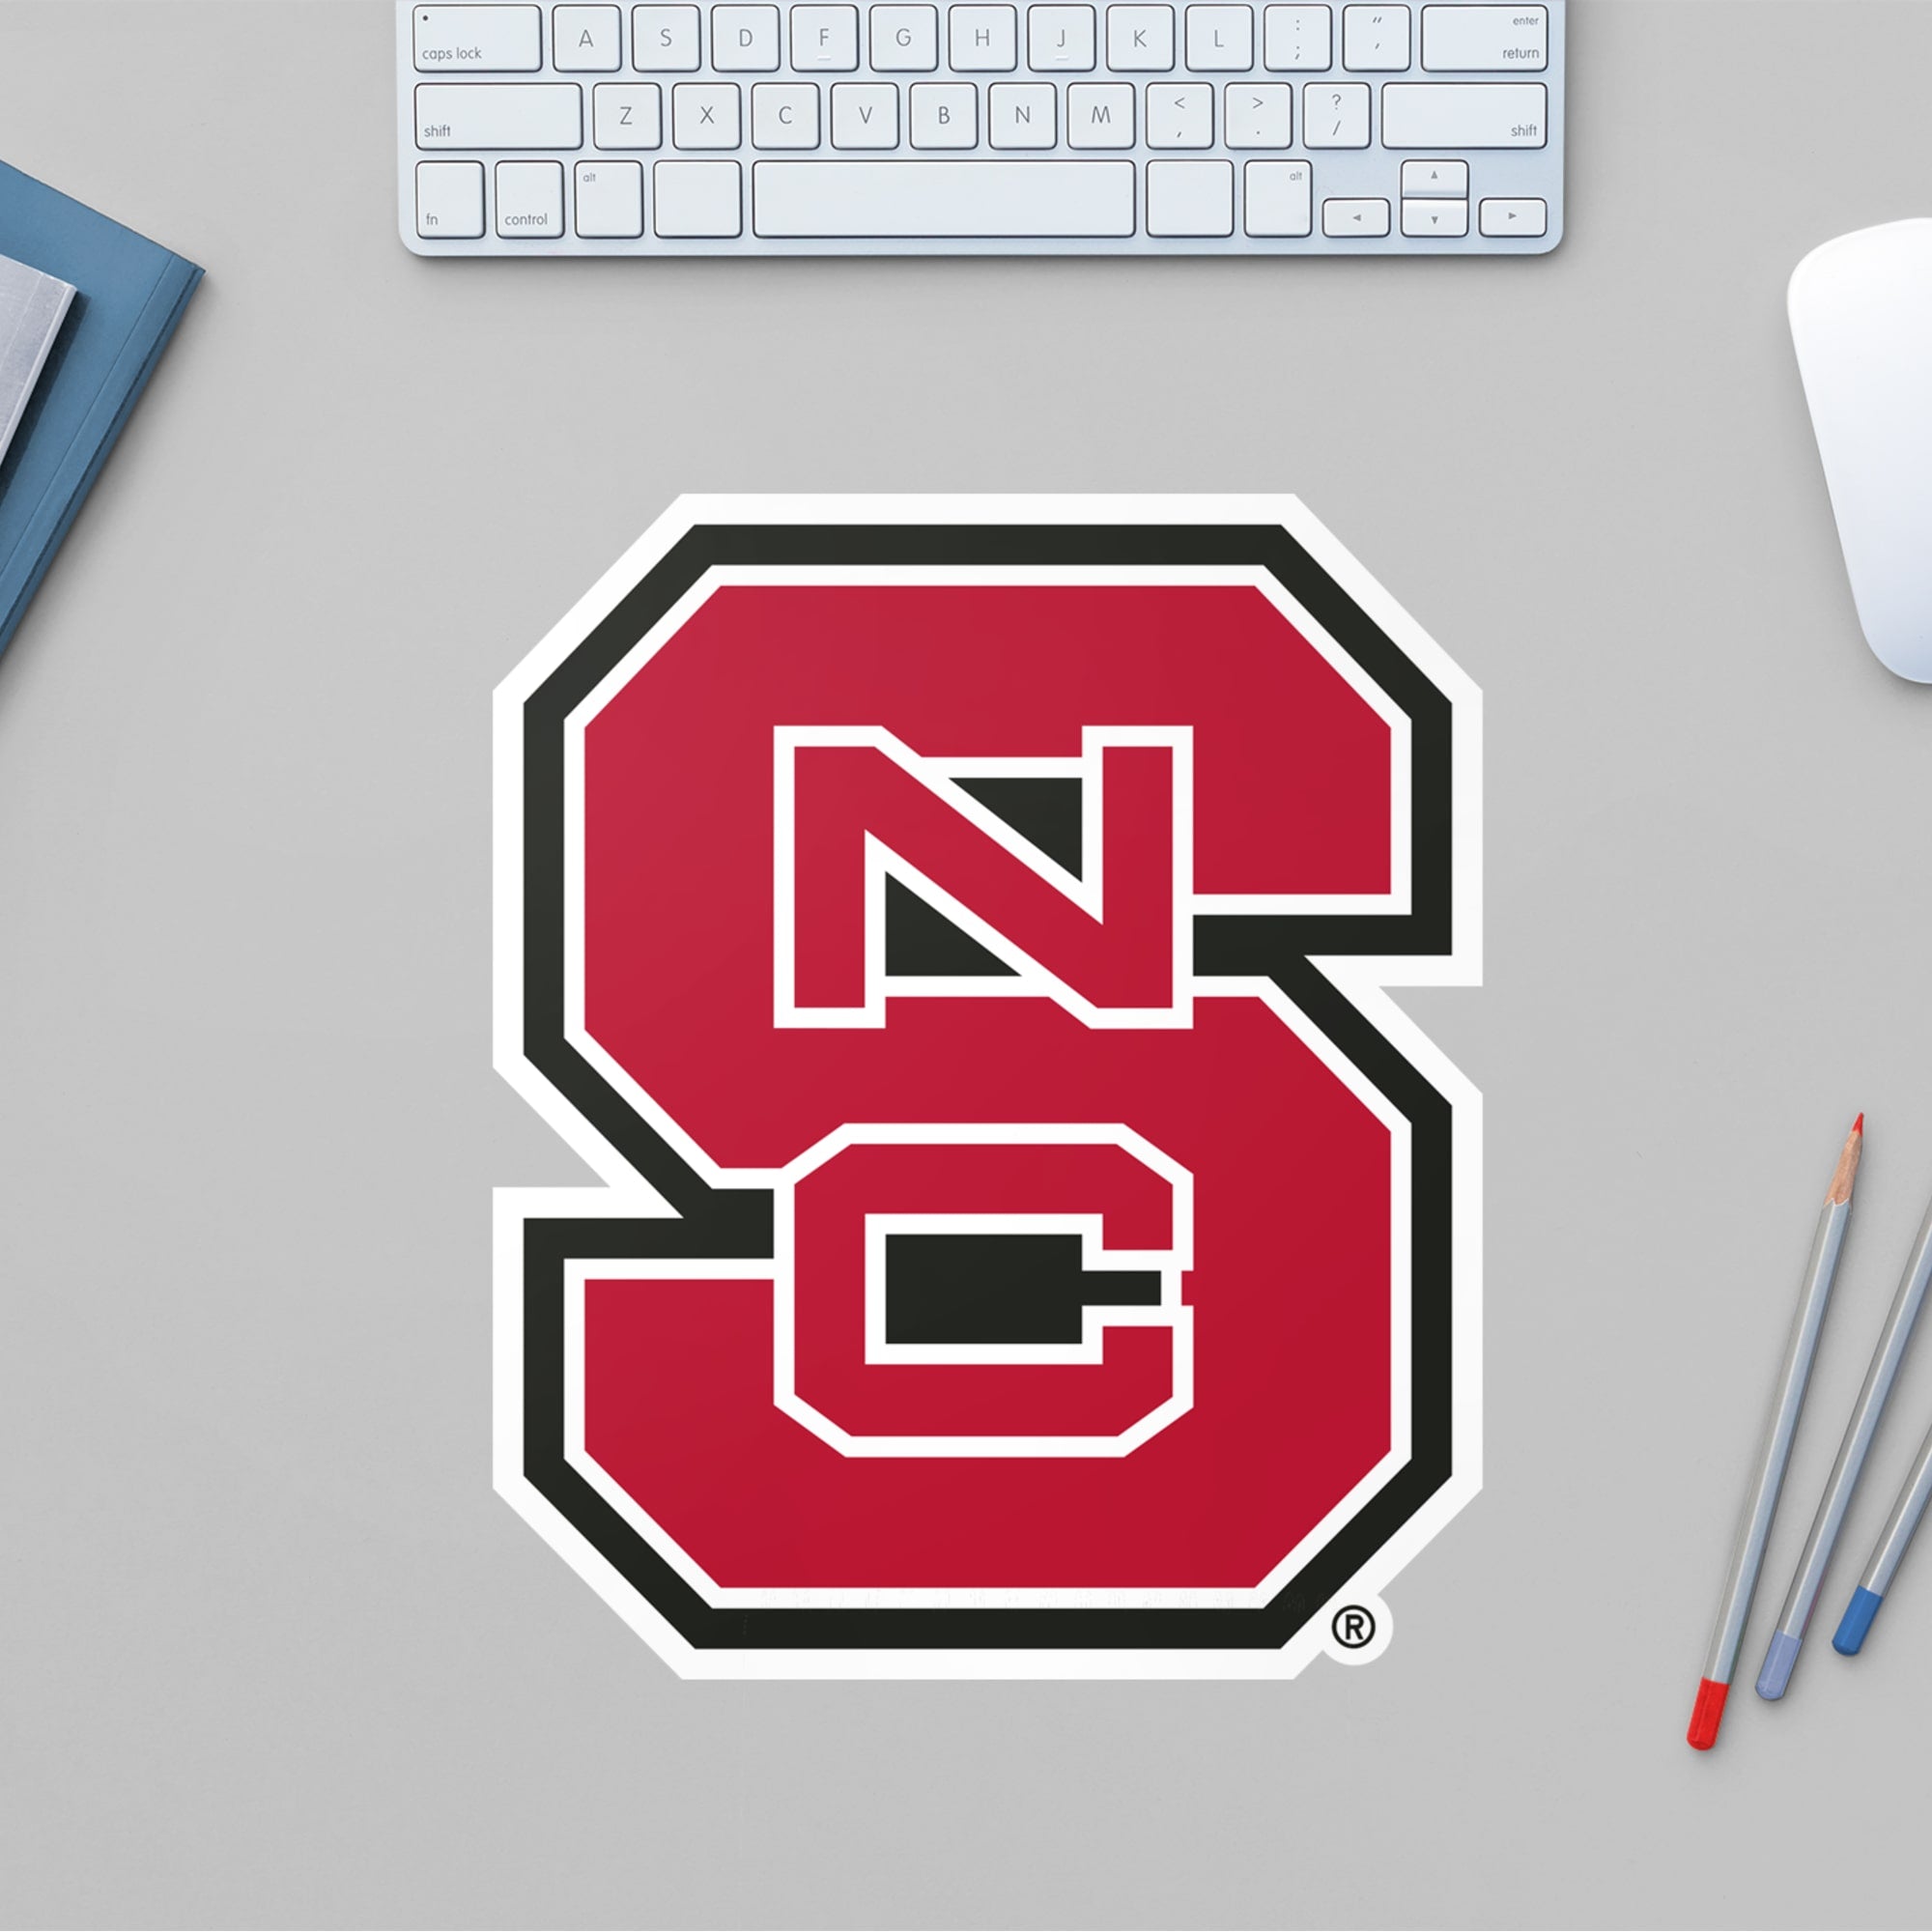 North Carolina State Wolfpack for NC State Wolfpack: Logo - Officially Licensed Removable Wall Decal 9.0"W x 11.0"H by Fathead |